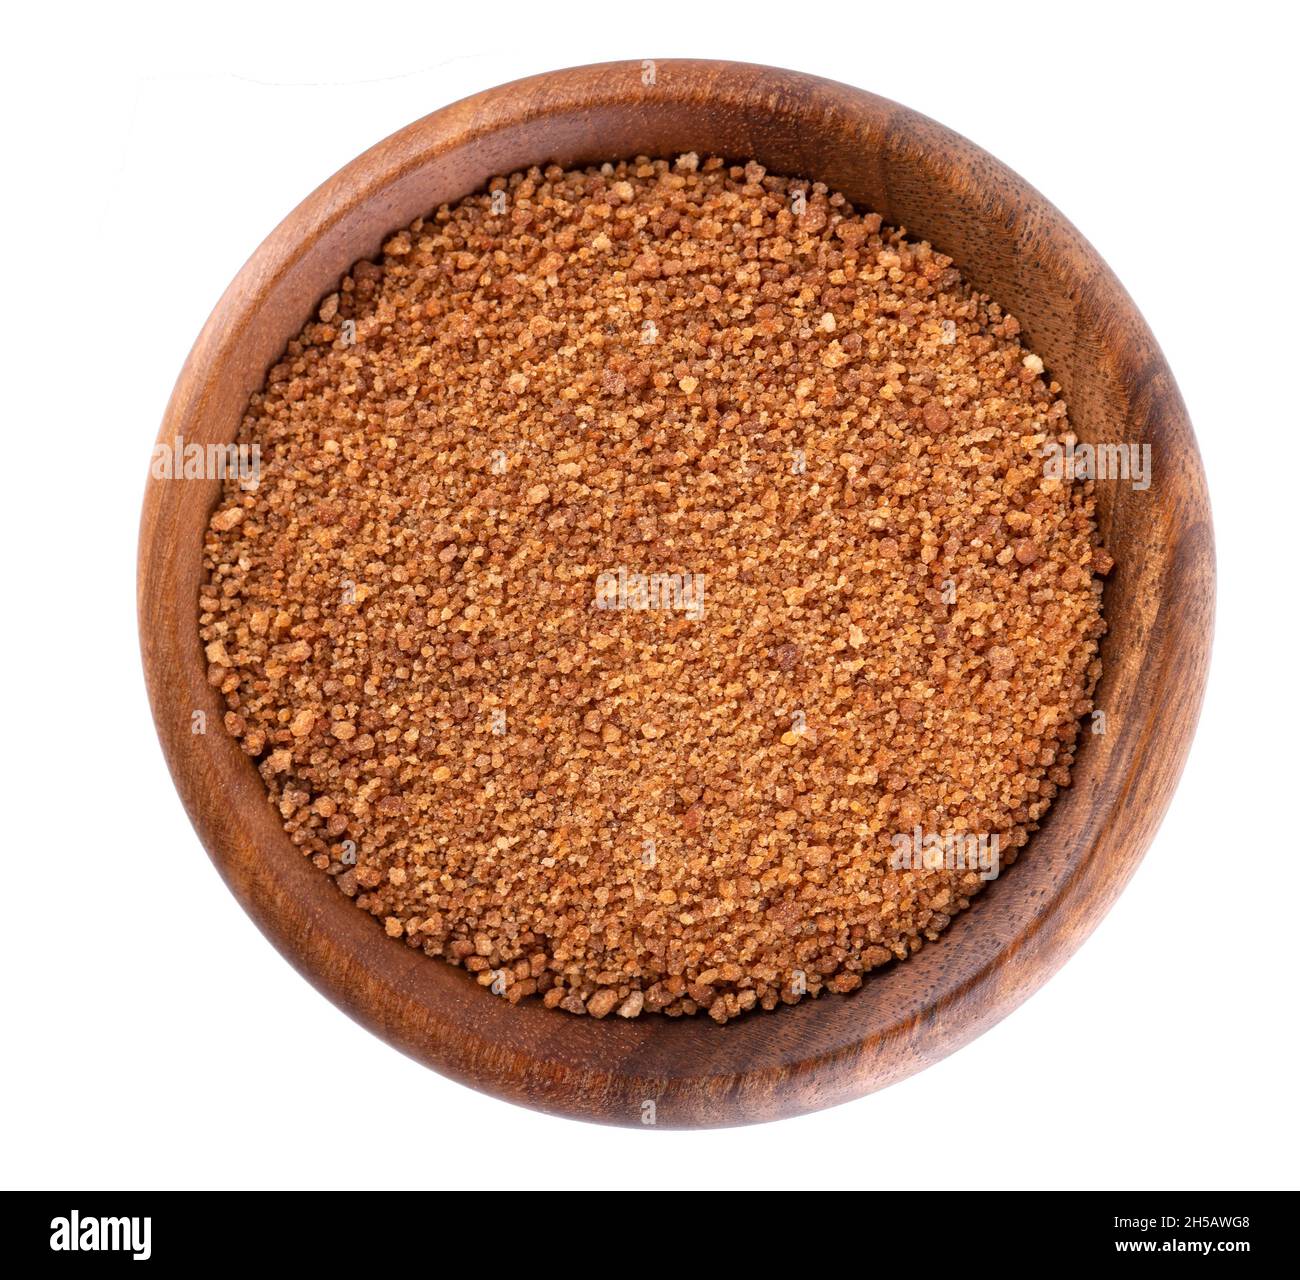 Coconut sugar isolated on white background. Brown unrefined coconut palm sugar in wooden bowl. Top view. Stock Photo